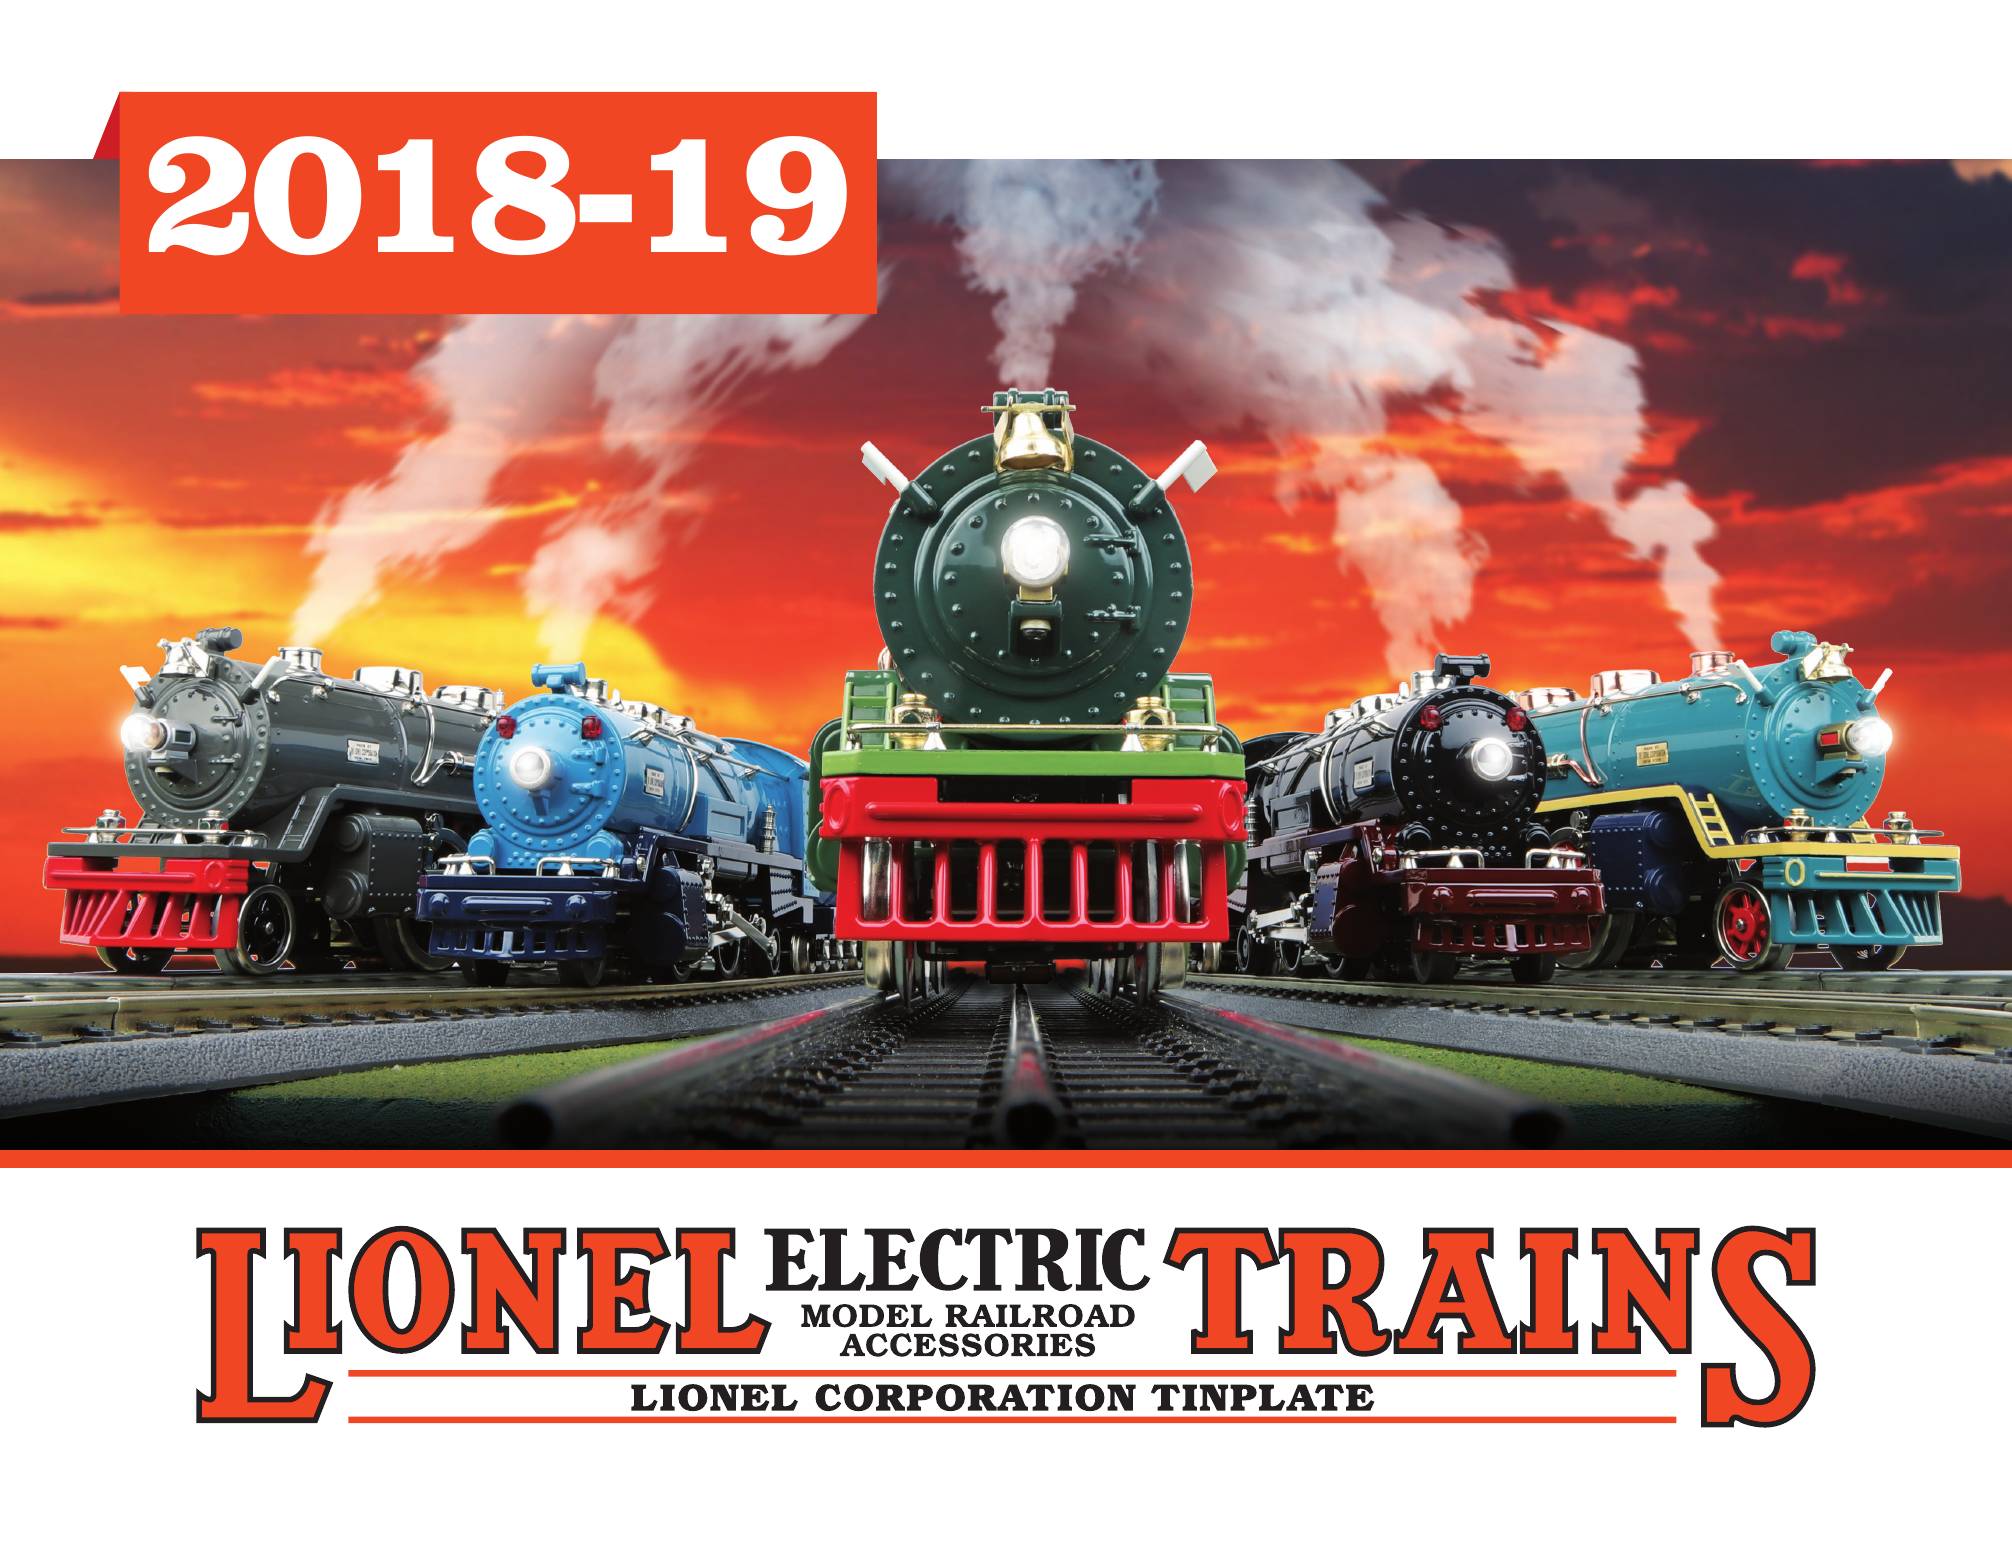 mth electric trains catalog